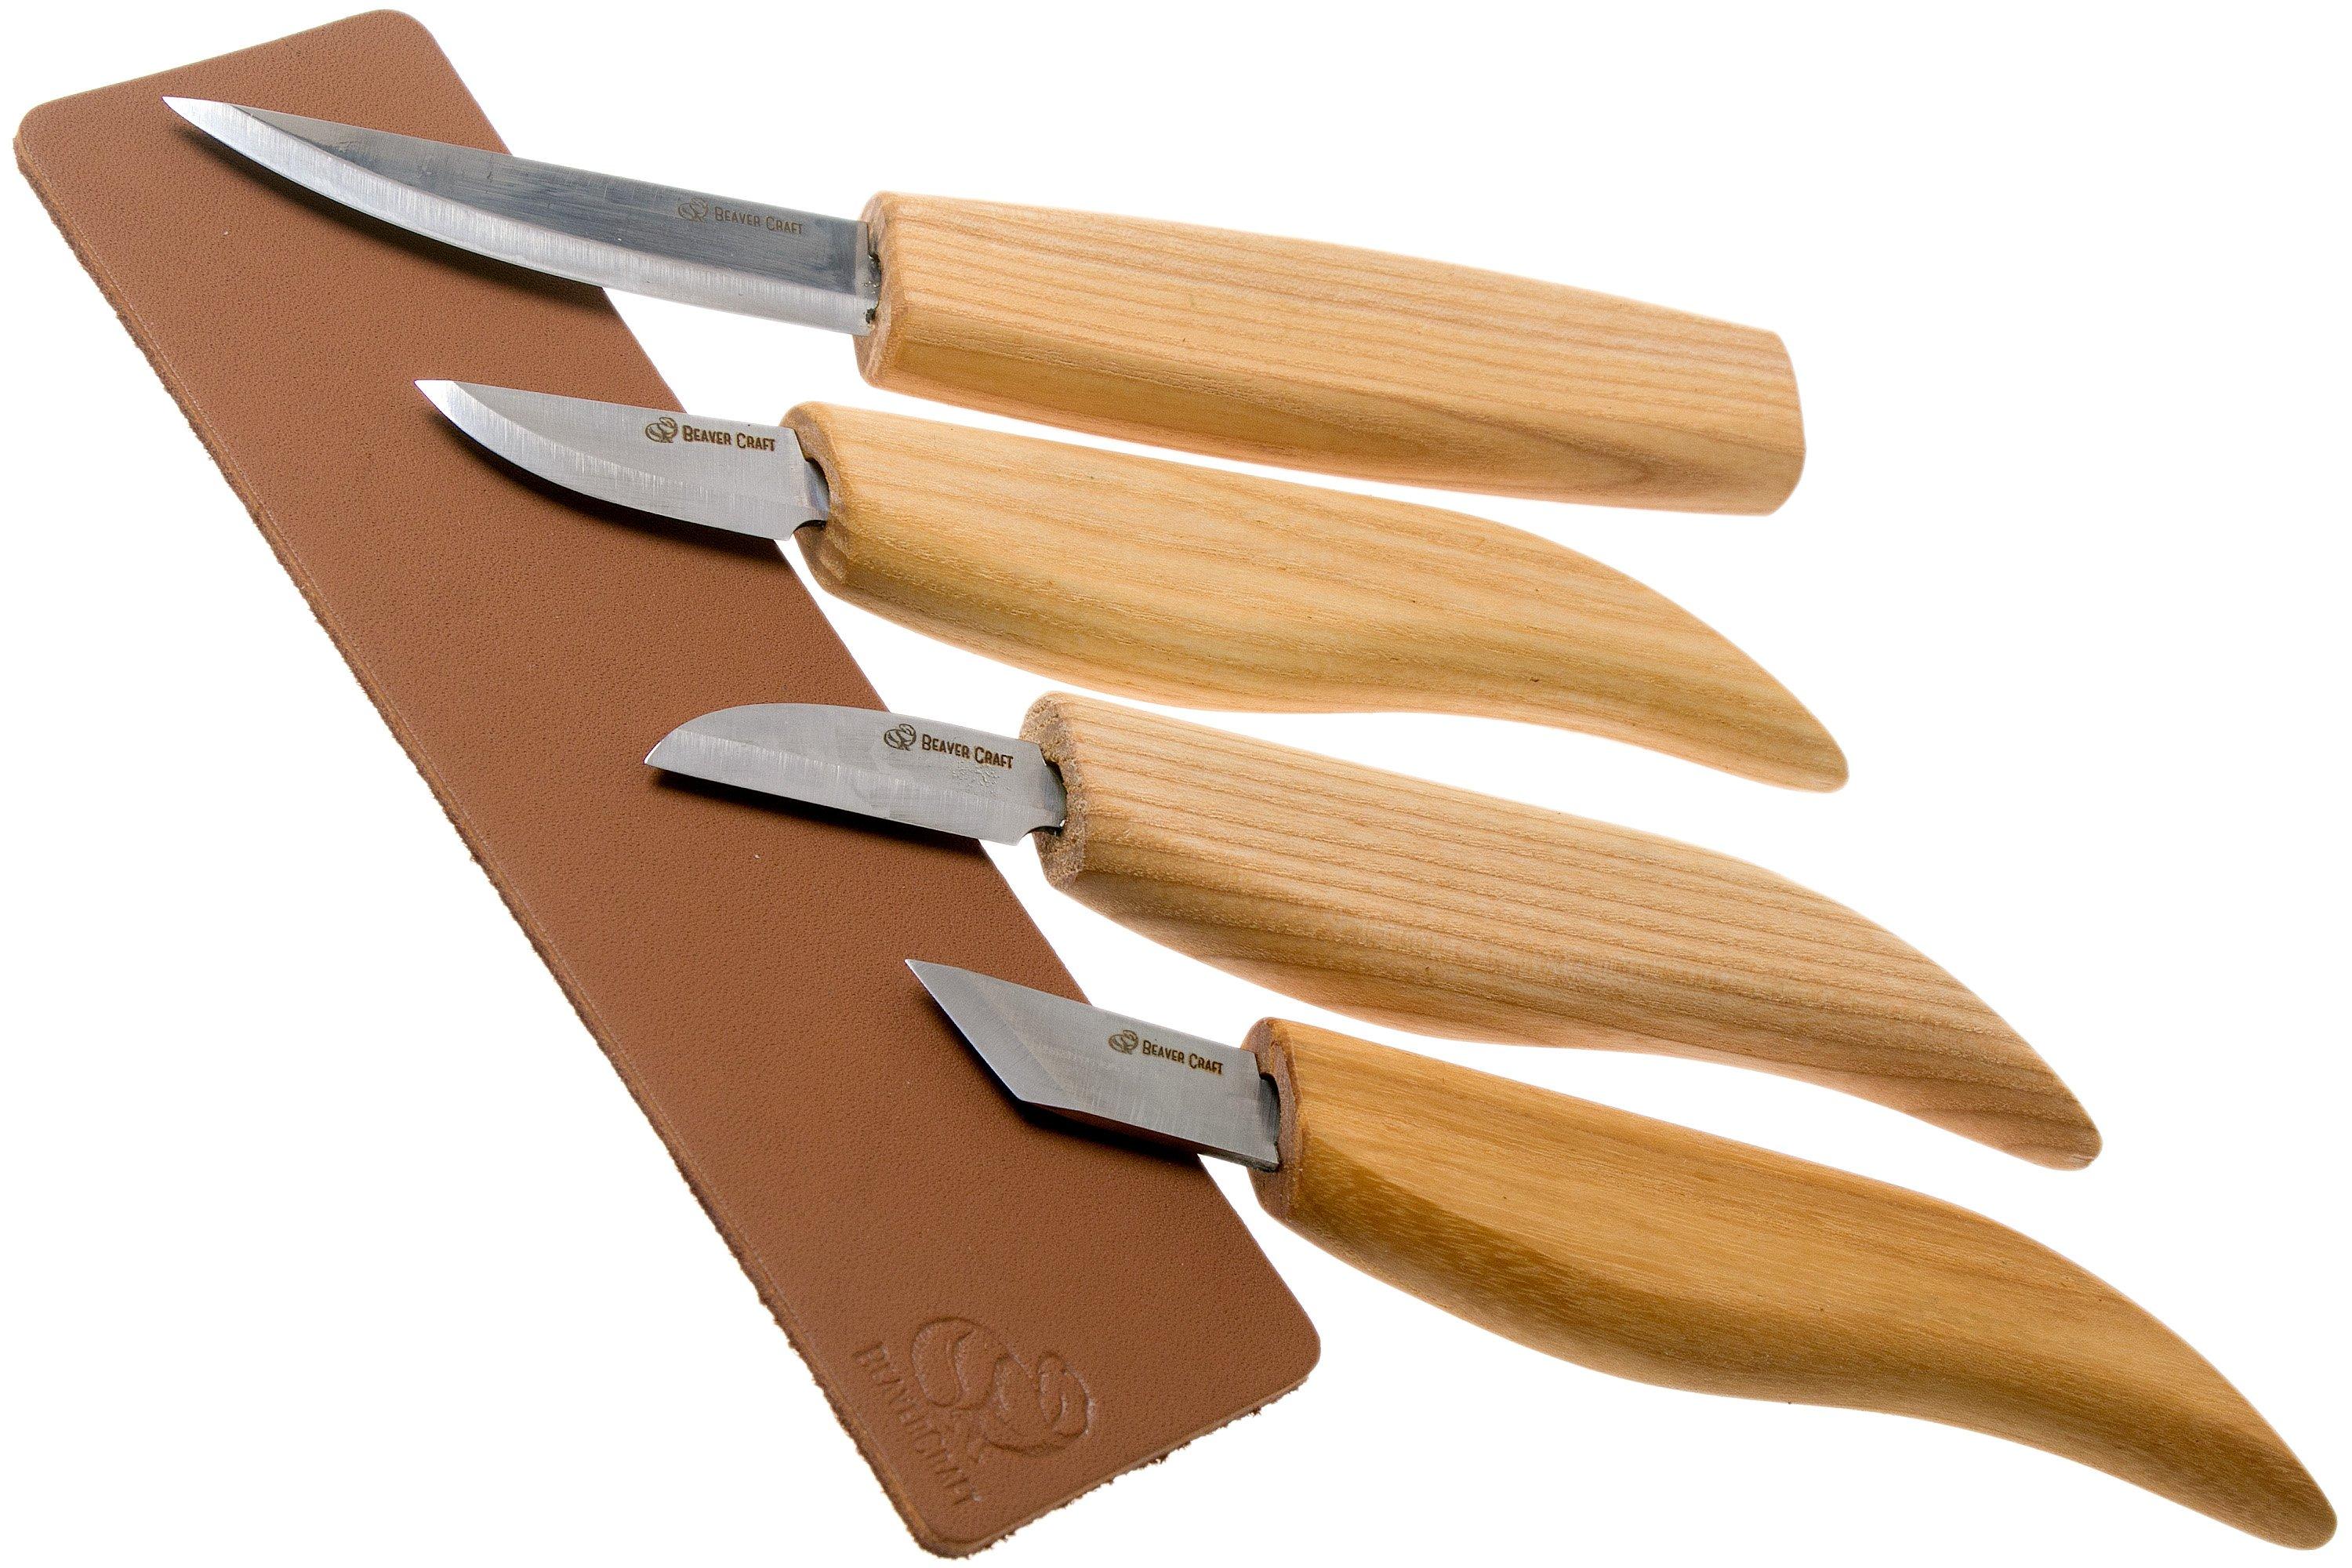 Buy S07 Book - Basic Knives Set of 4 Knives in a Book Case online